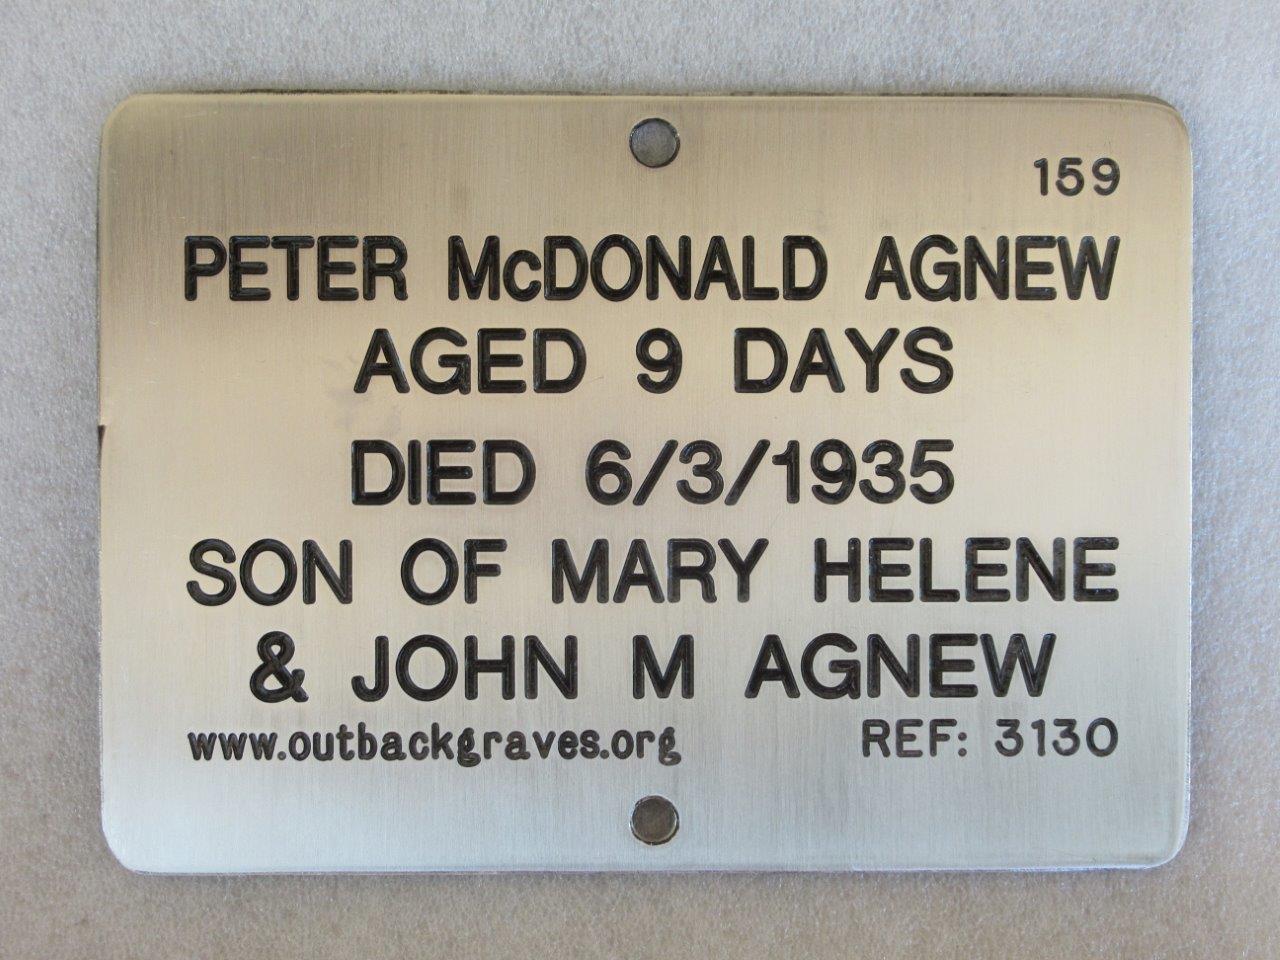 This is a photograph of plaque number 3130 for PETER McDONALD AGNEW at WILUNA